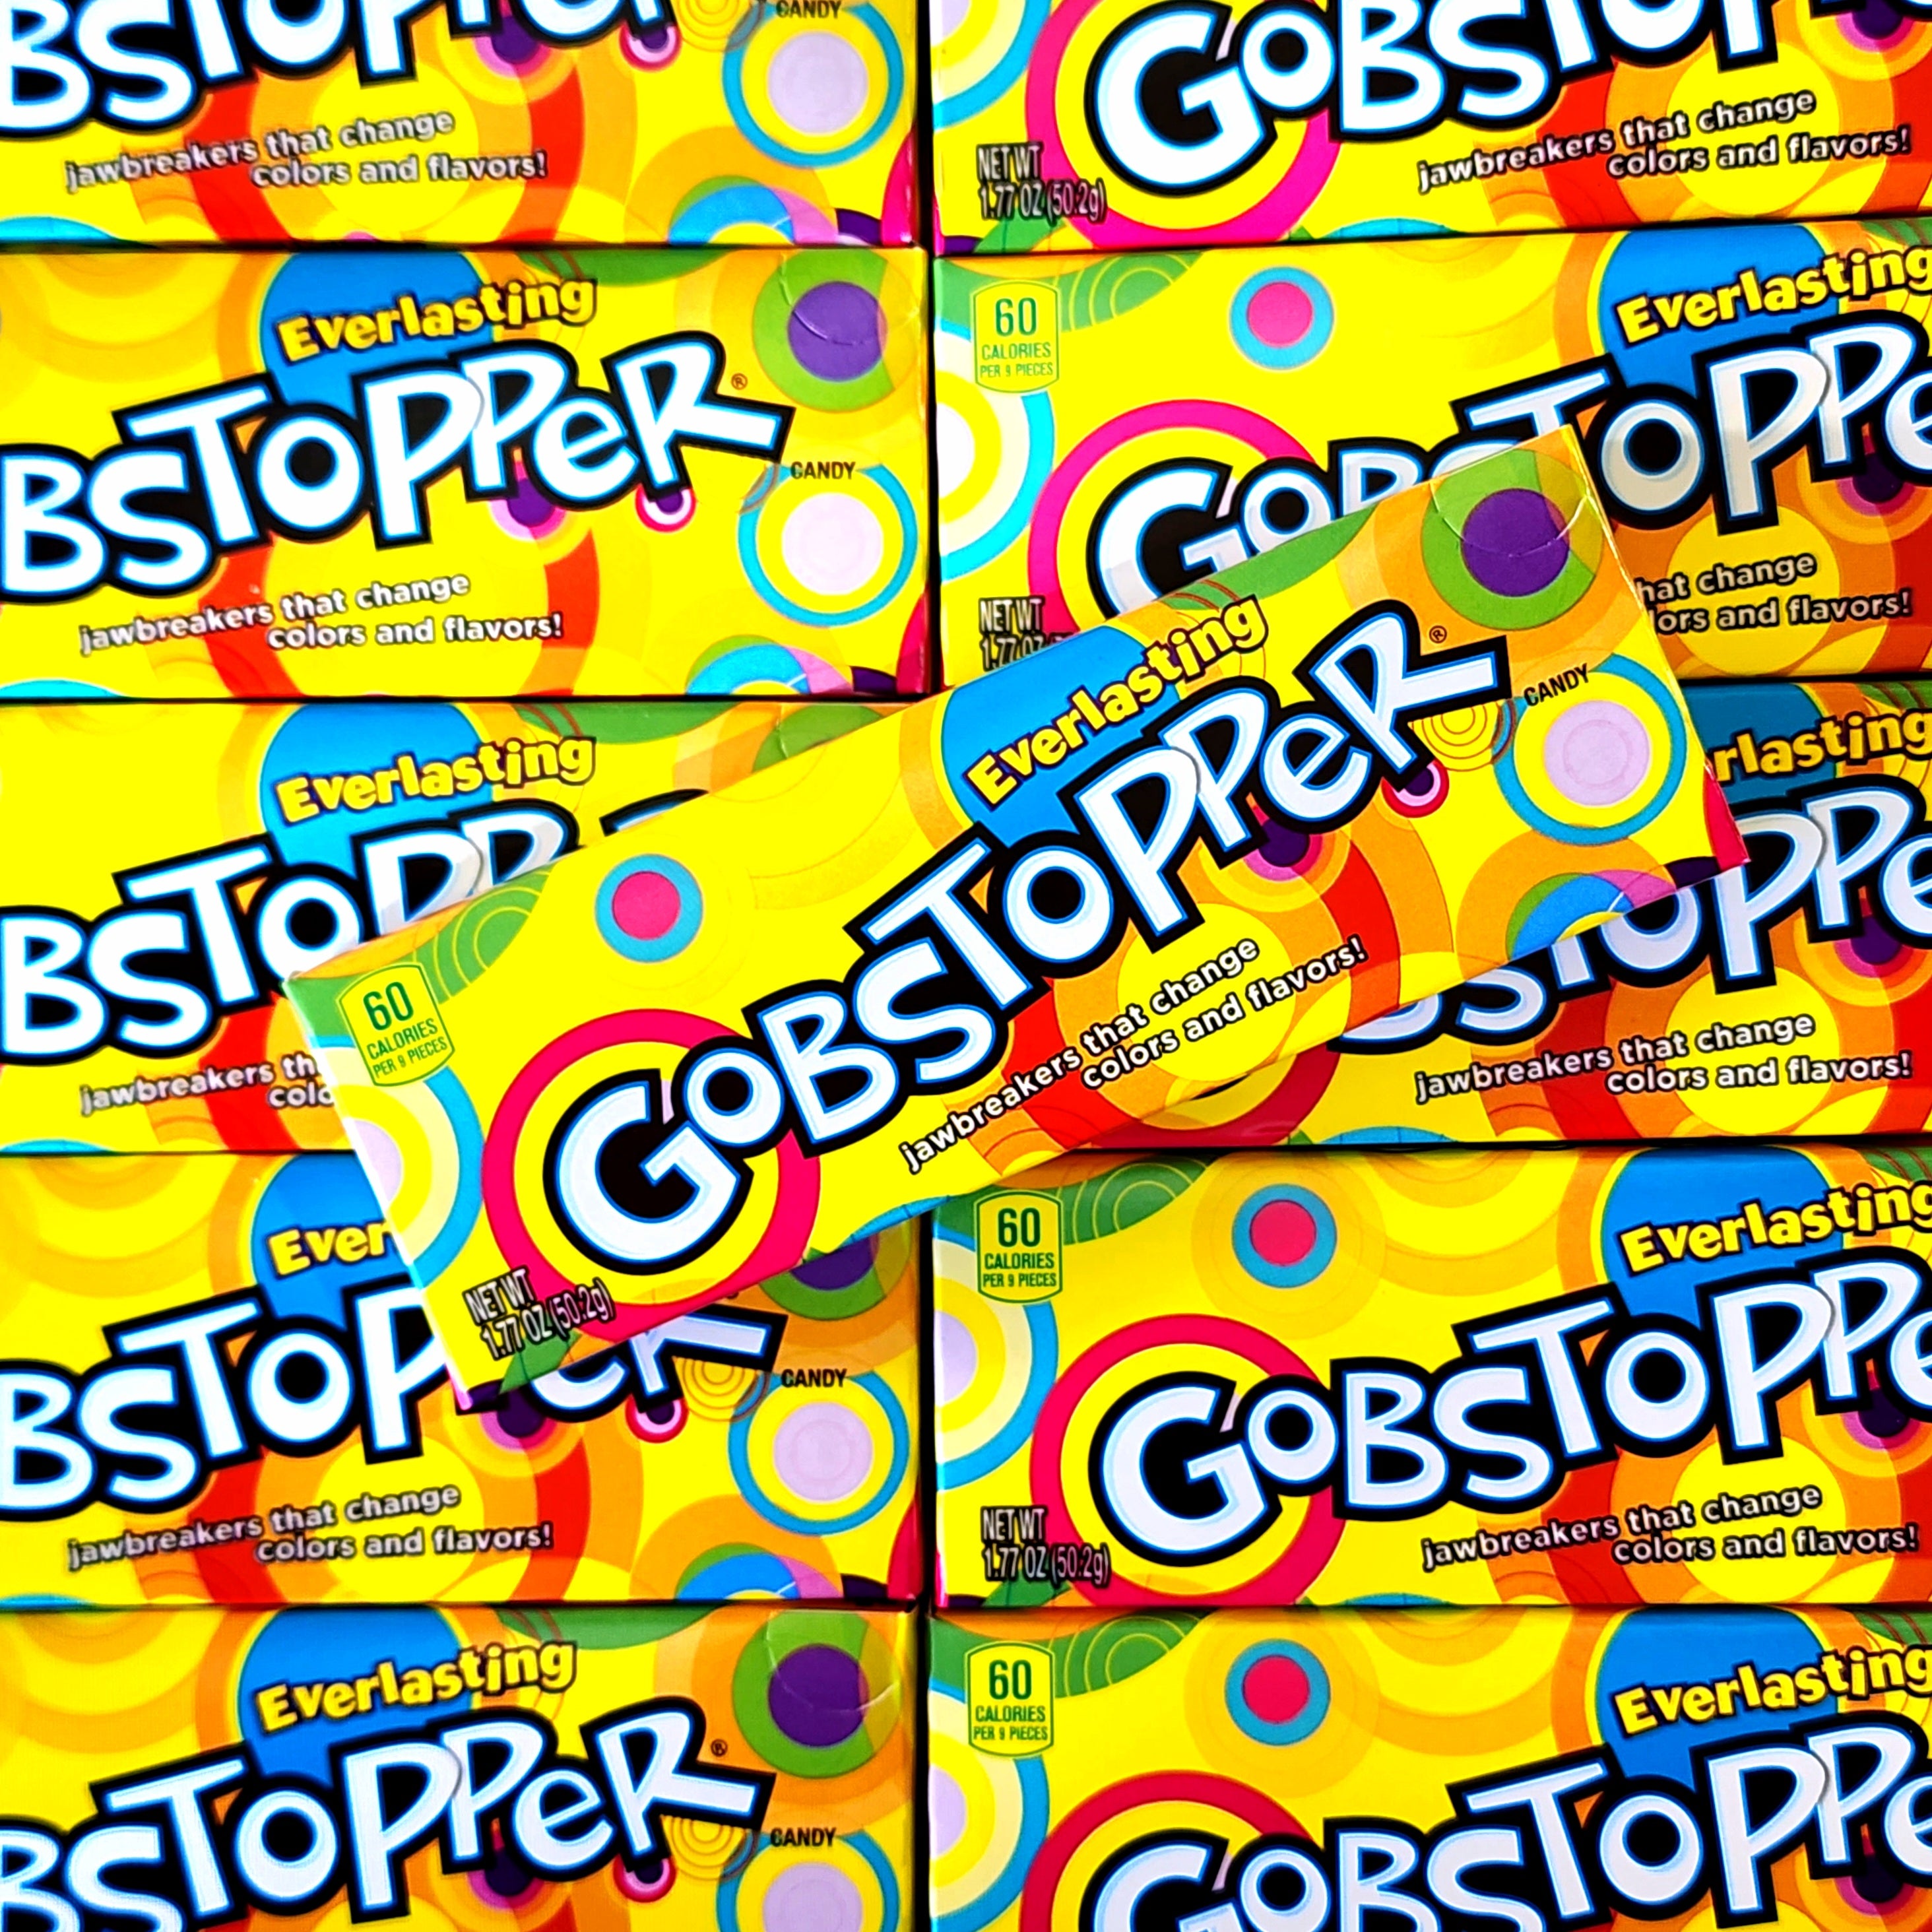 Everlasting Gobstoppers - Pik n Mix Lollies NZ